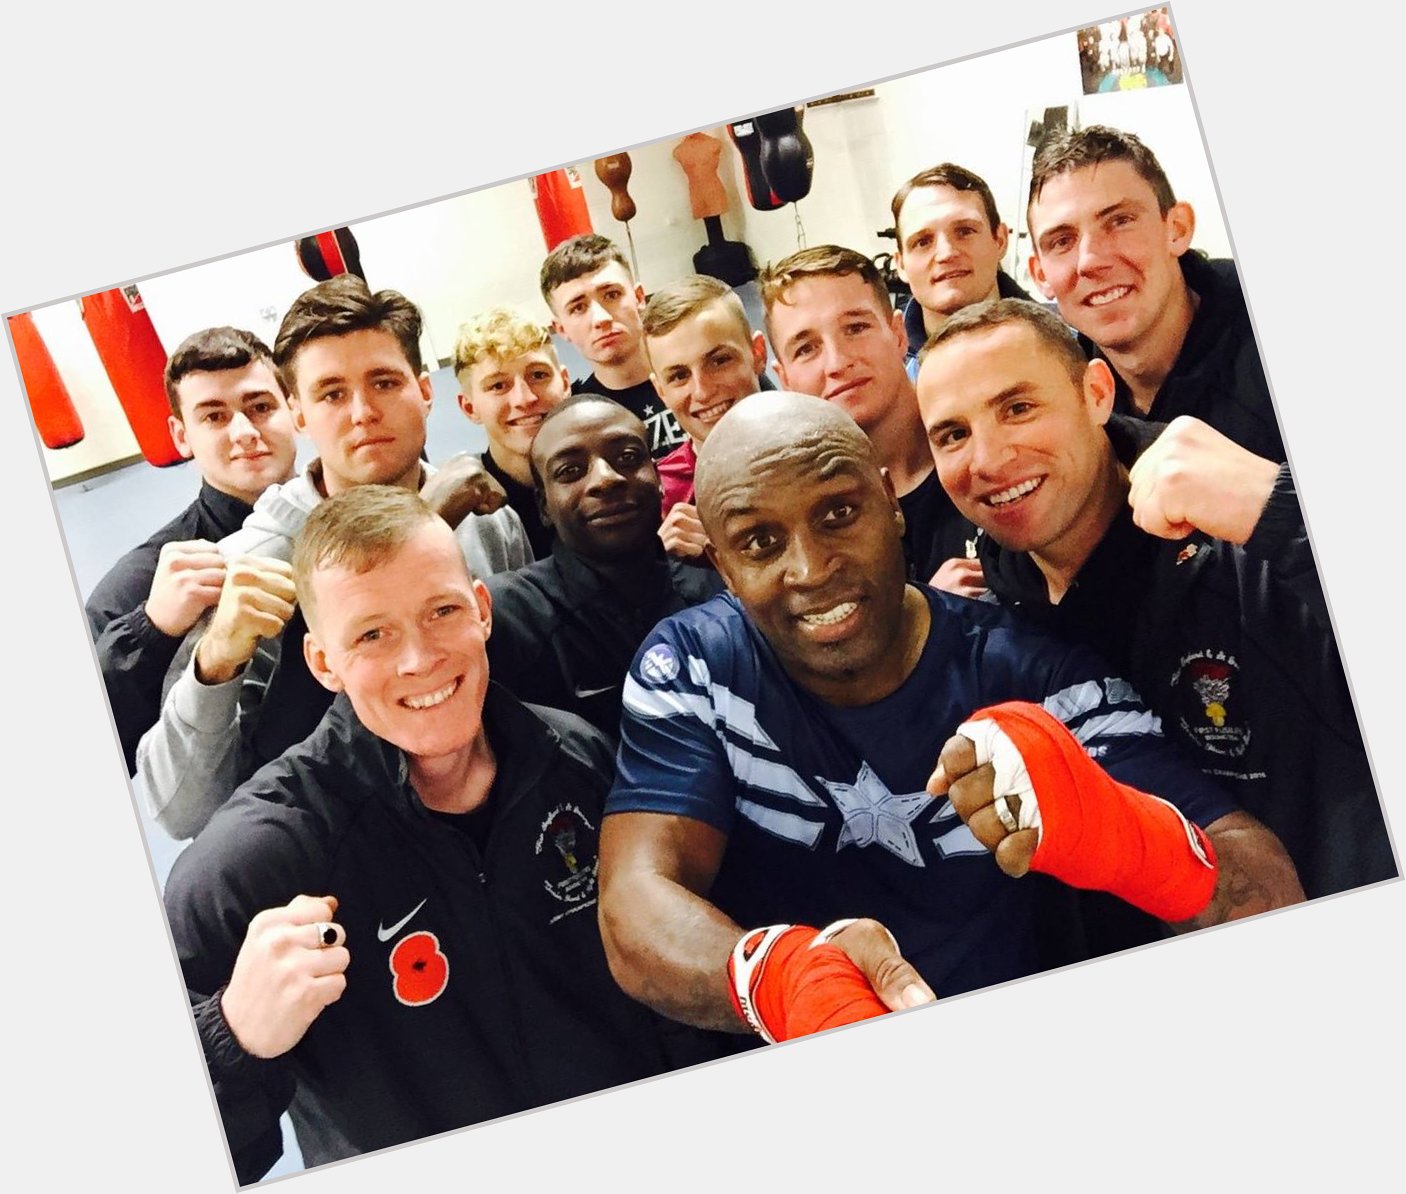 A very happy birthday to Nigel Benn from all of us here at First Fusiliers!  